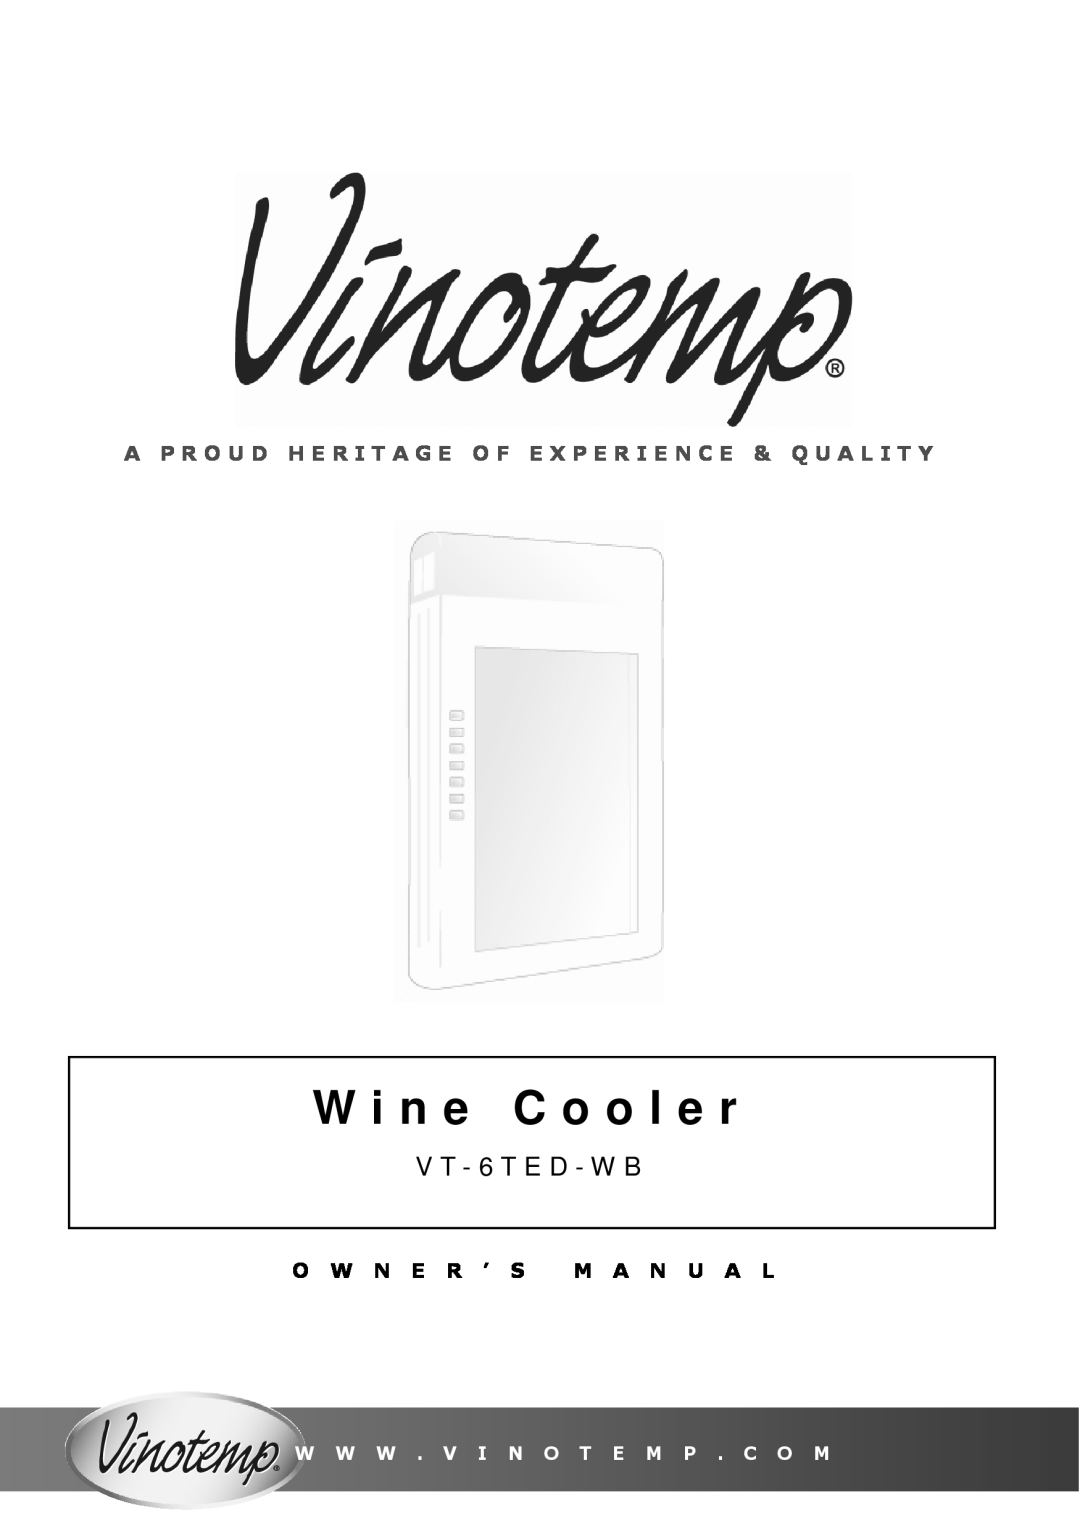 Vinotemp VT-6TED-WB, VT-6TED-WW owner manual W I N E C O O L E R, V T - 6 T E D - W B, O W N E R ’ S M A N U A L 